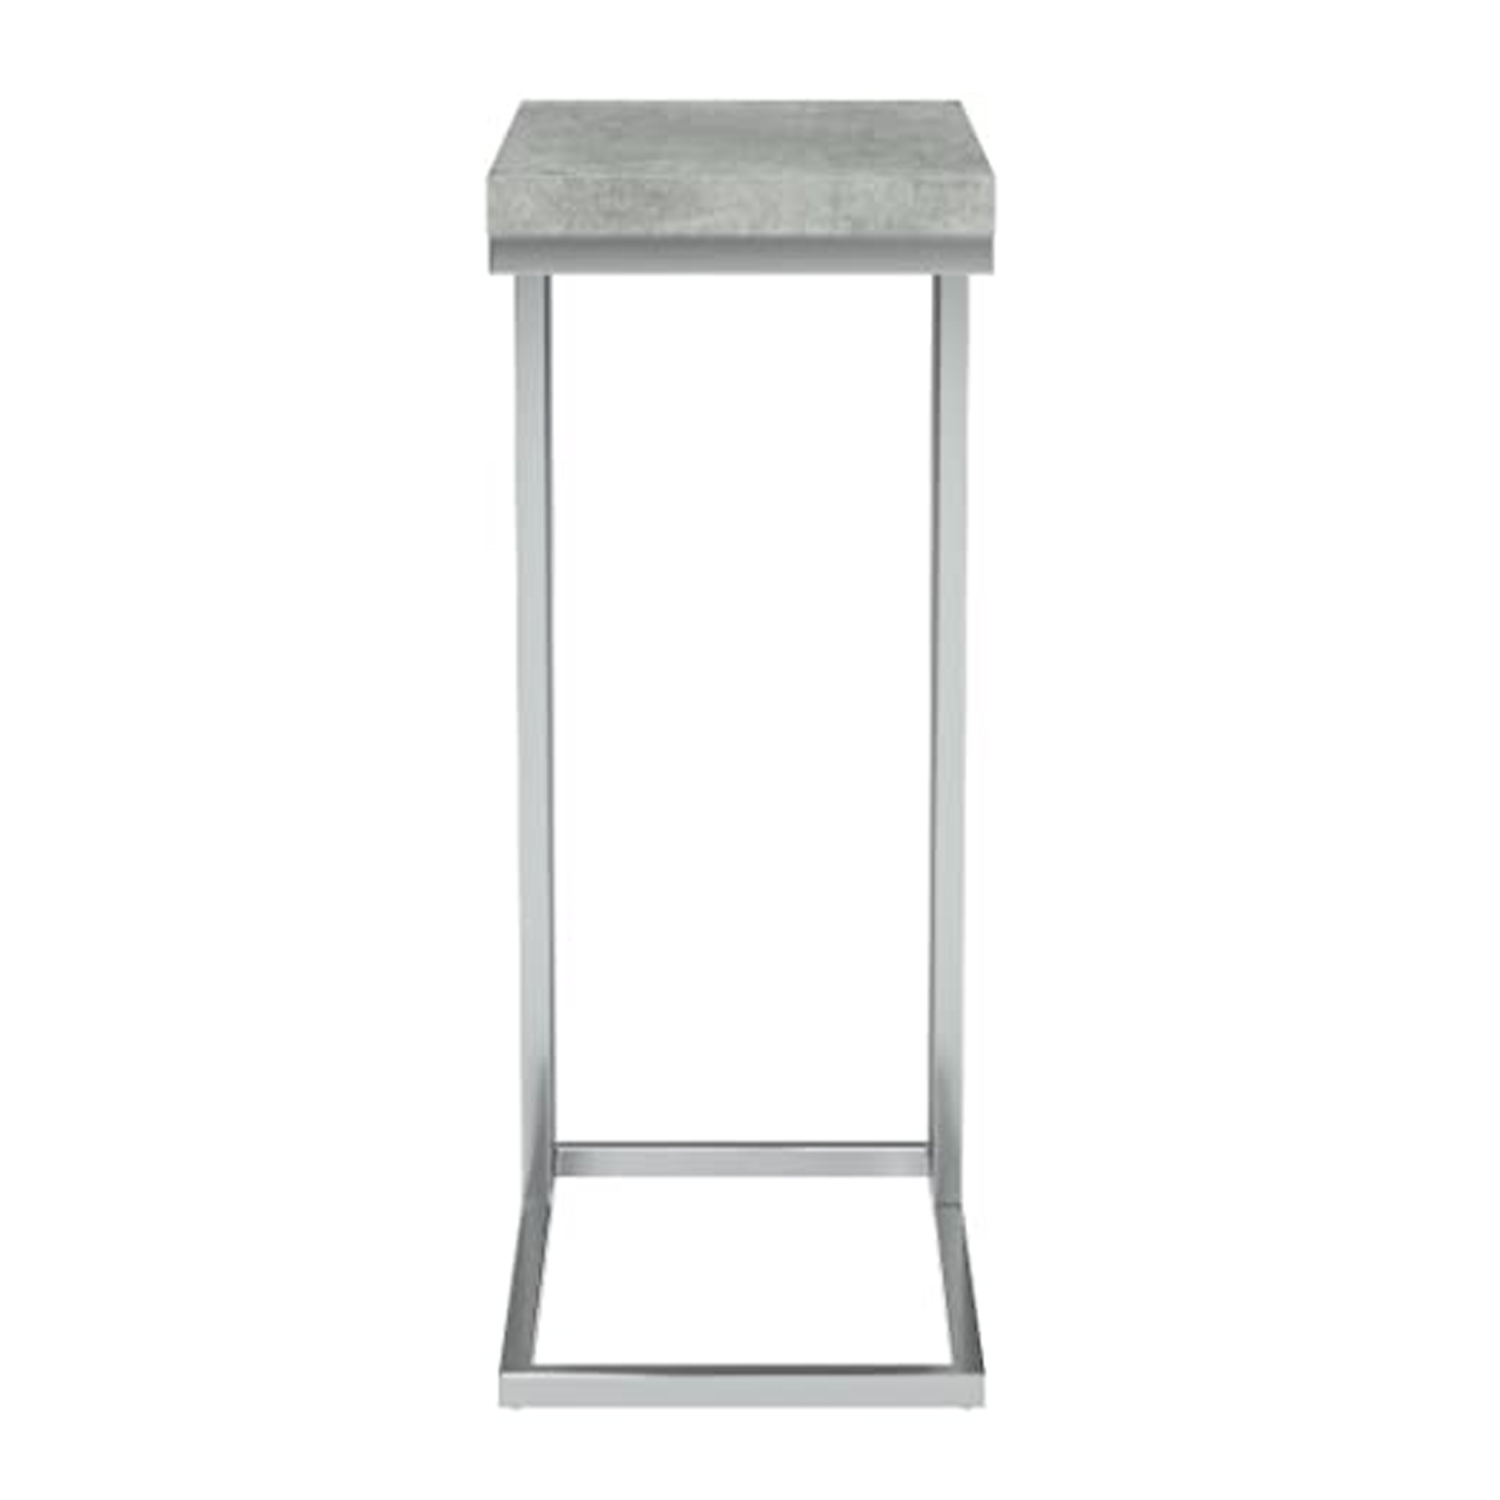 18.25" x 10.25" x 25.25" Grey Particle Board Metal Accent Table